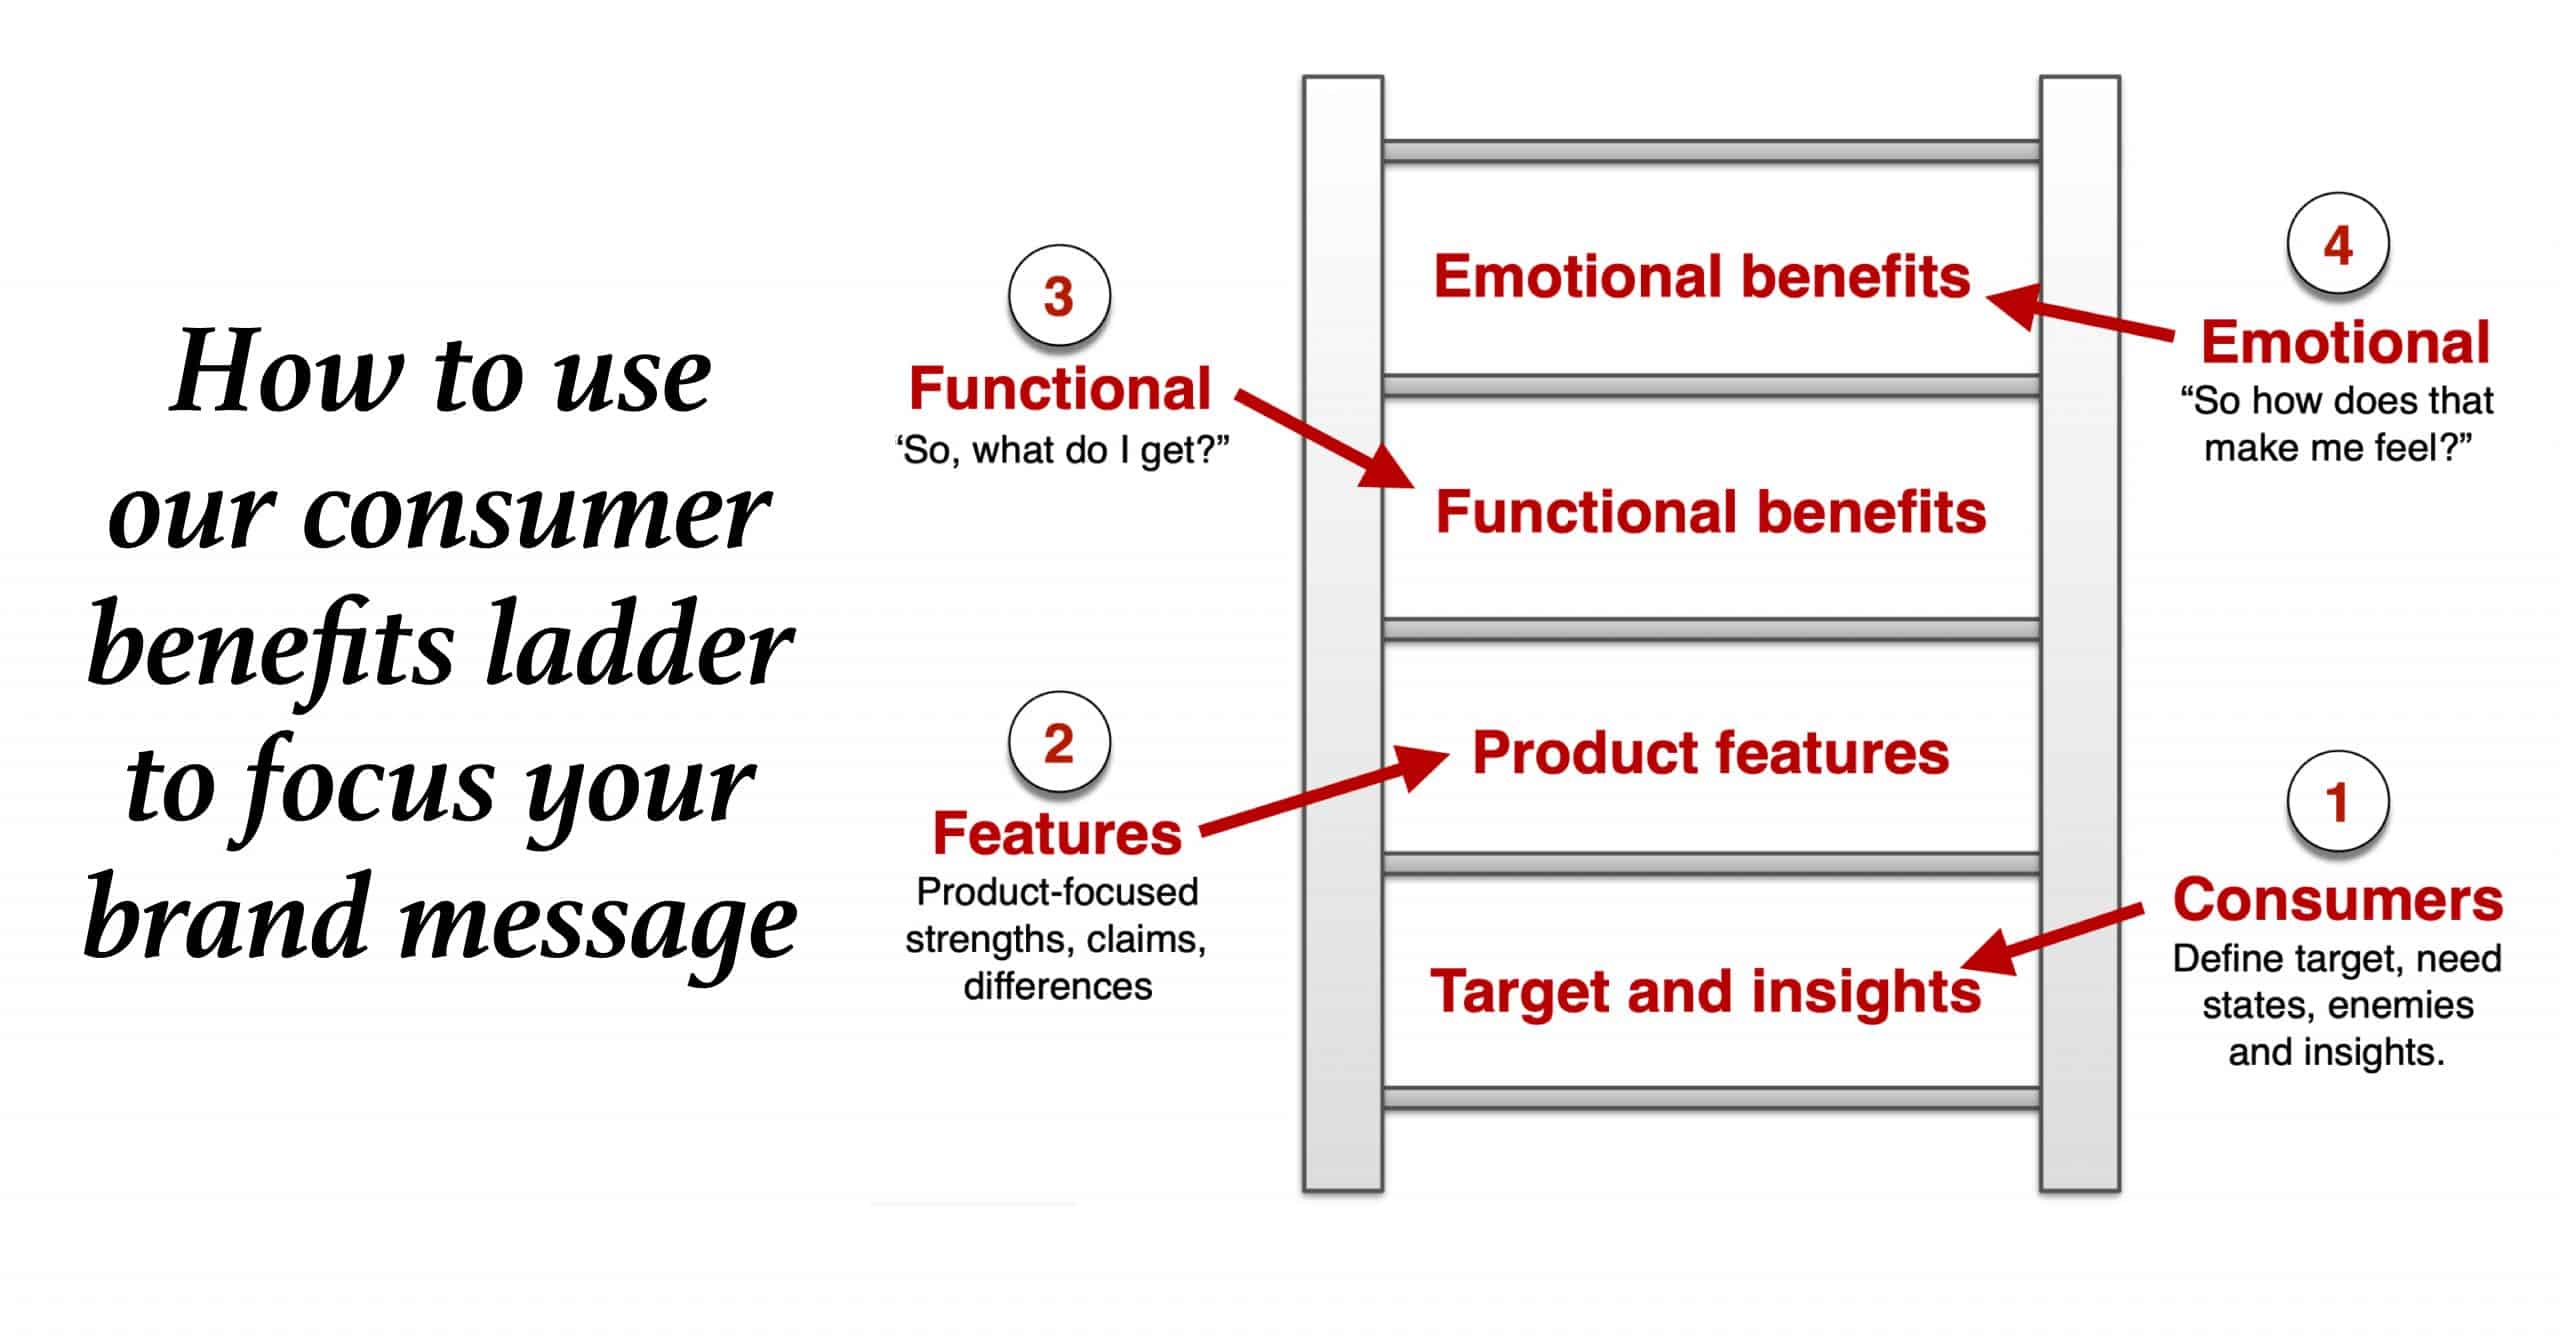 our-consumer-benefits-ladder-will-focus-your-brand-message